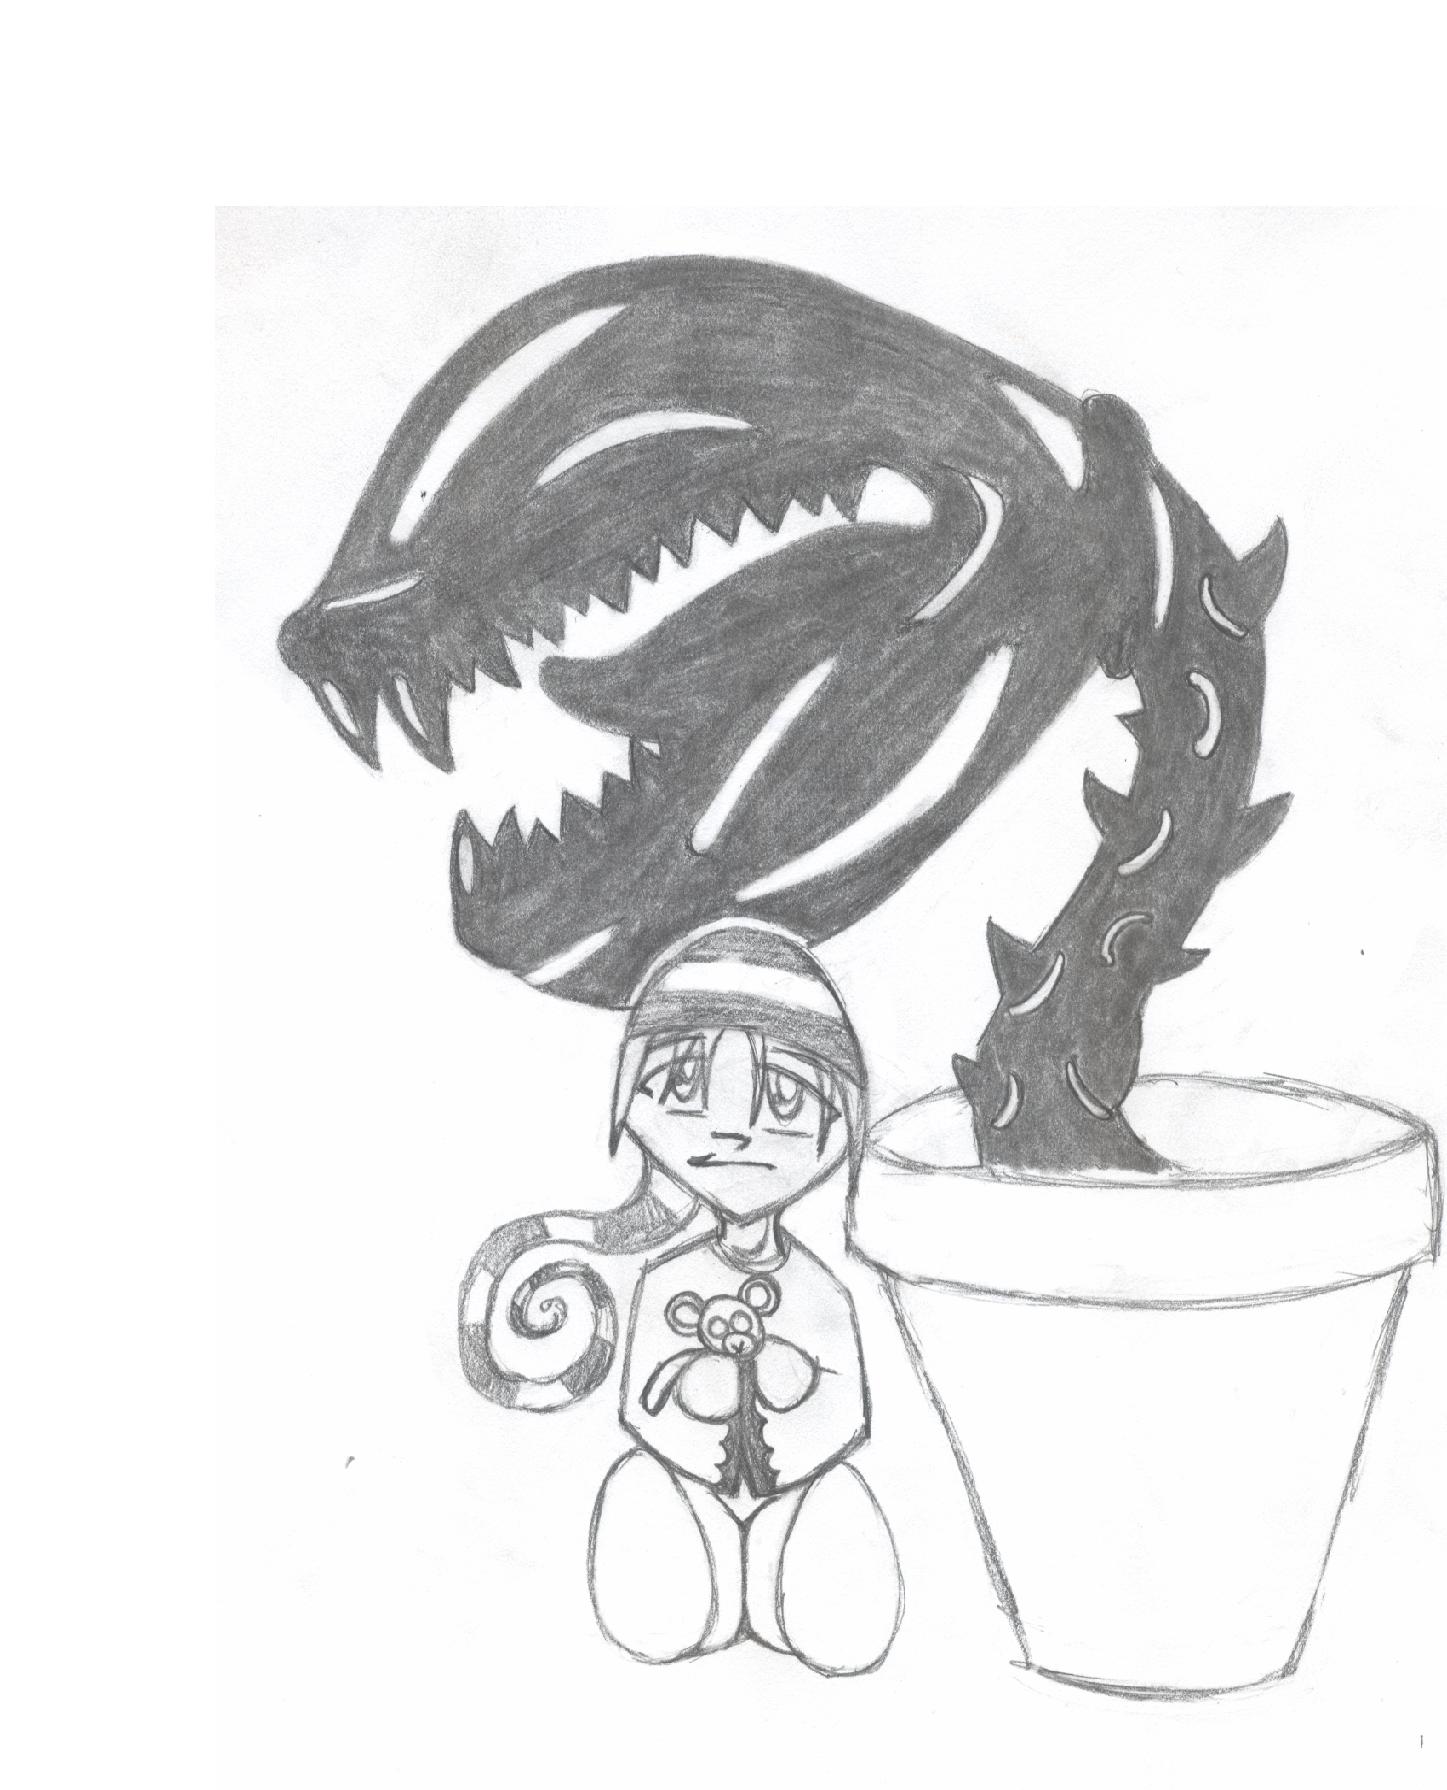 Little shop of horrors by Chisai_Kitsune